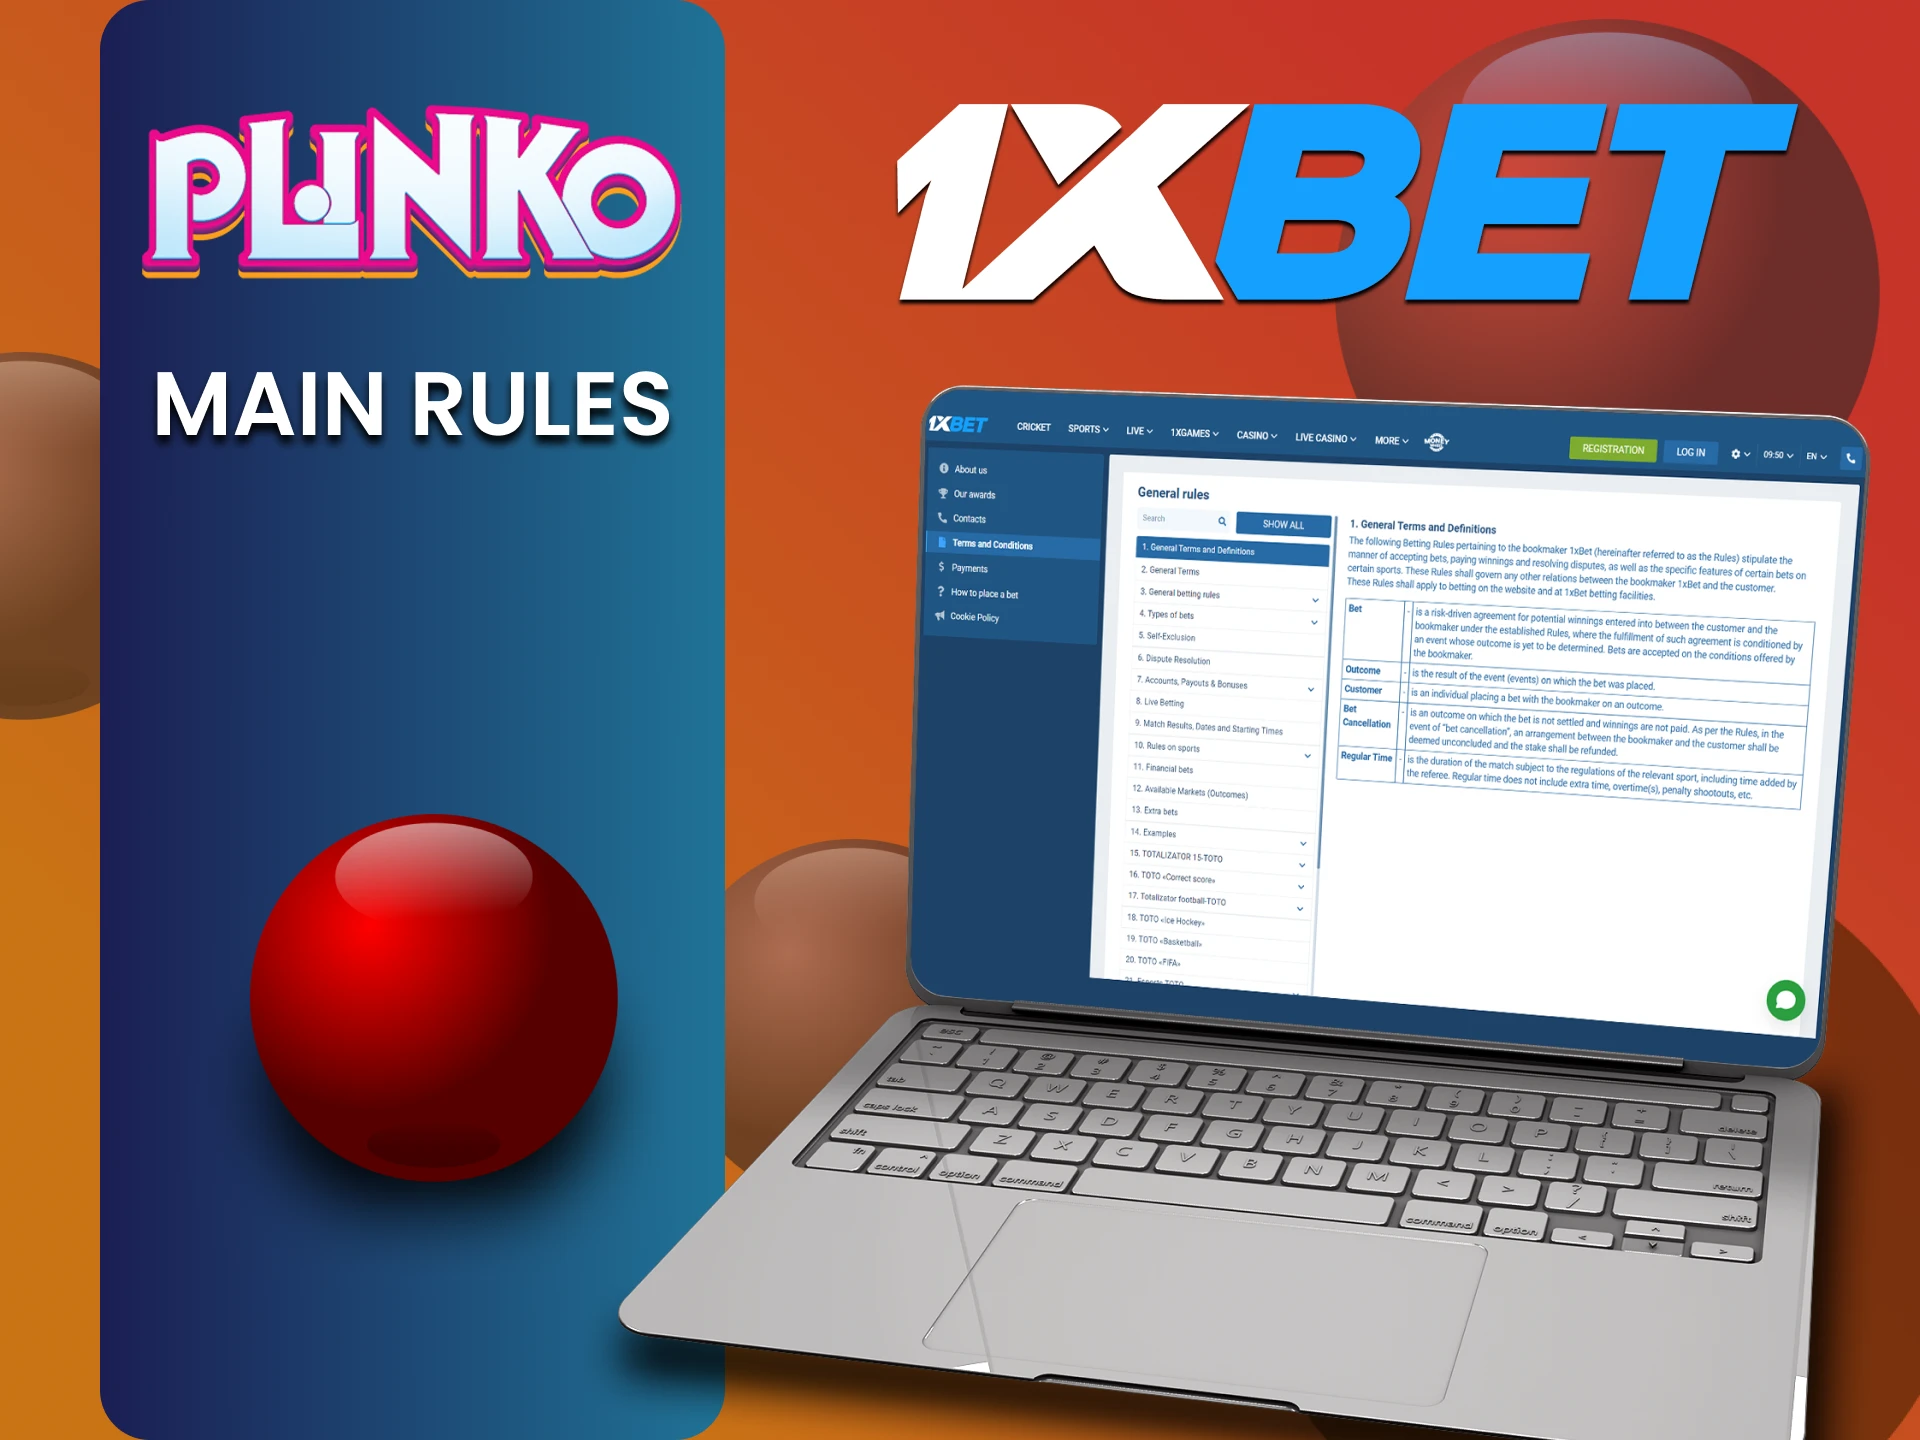 We will tell you about the rules for using 1xbet to play Plinko.